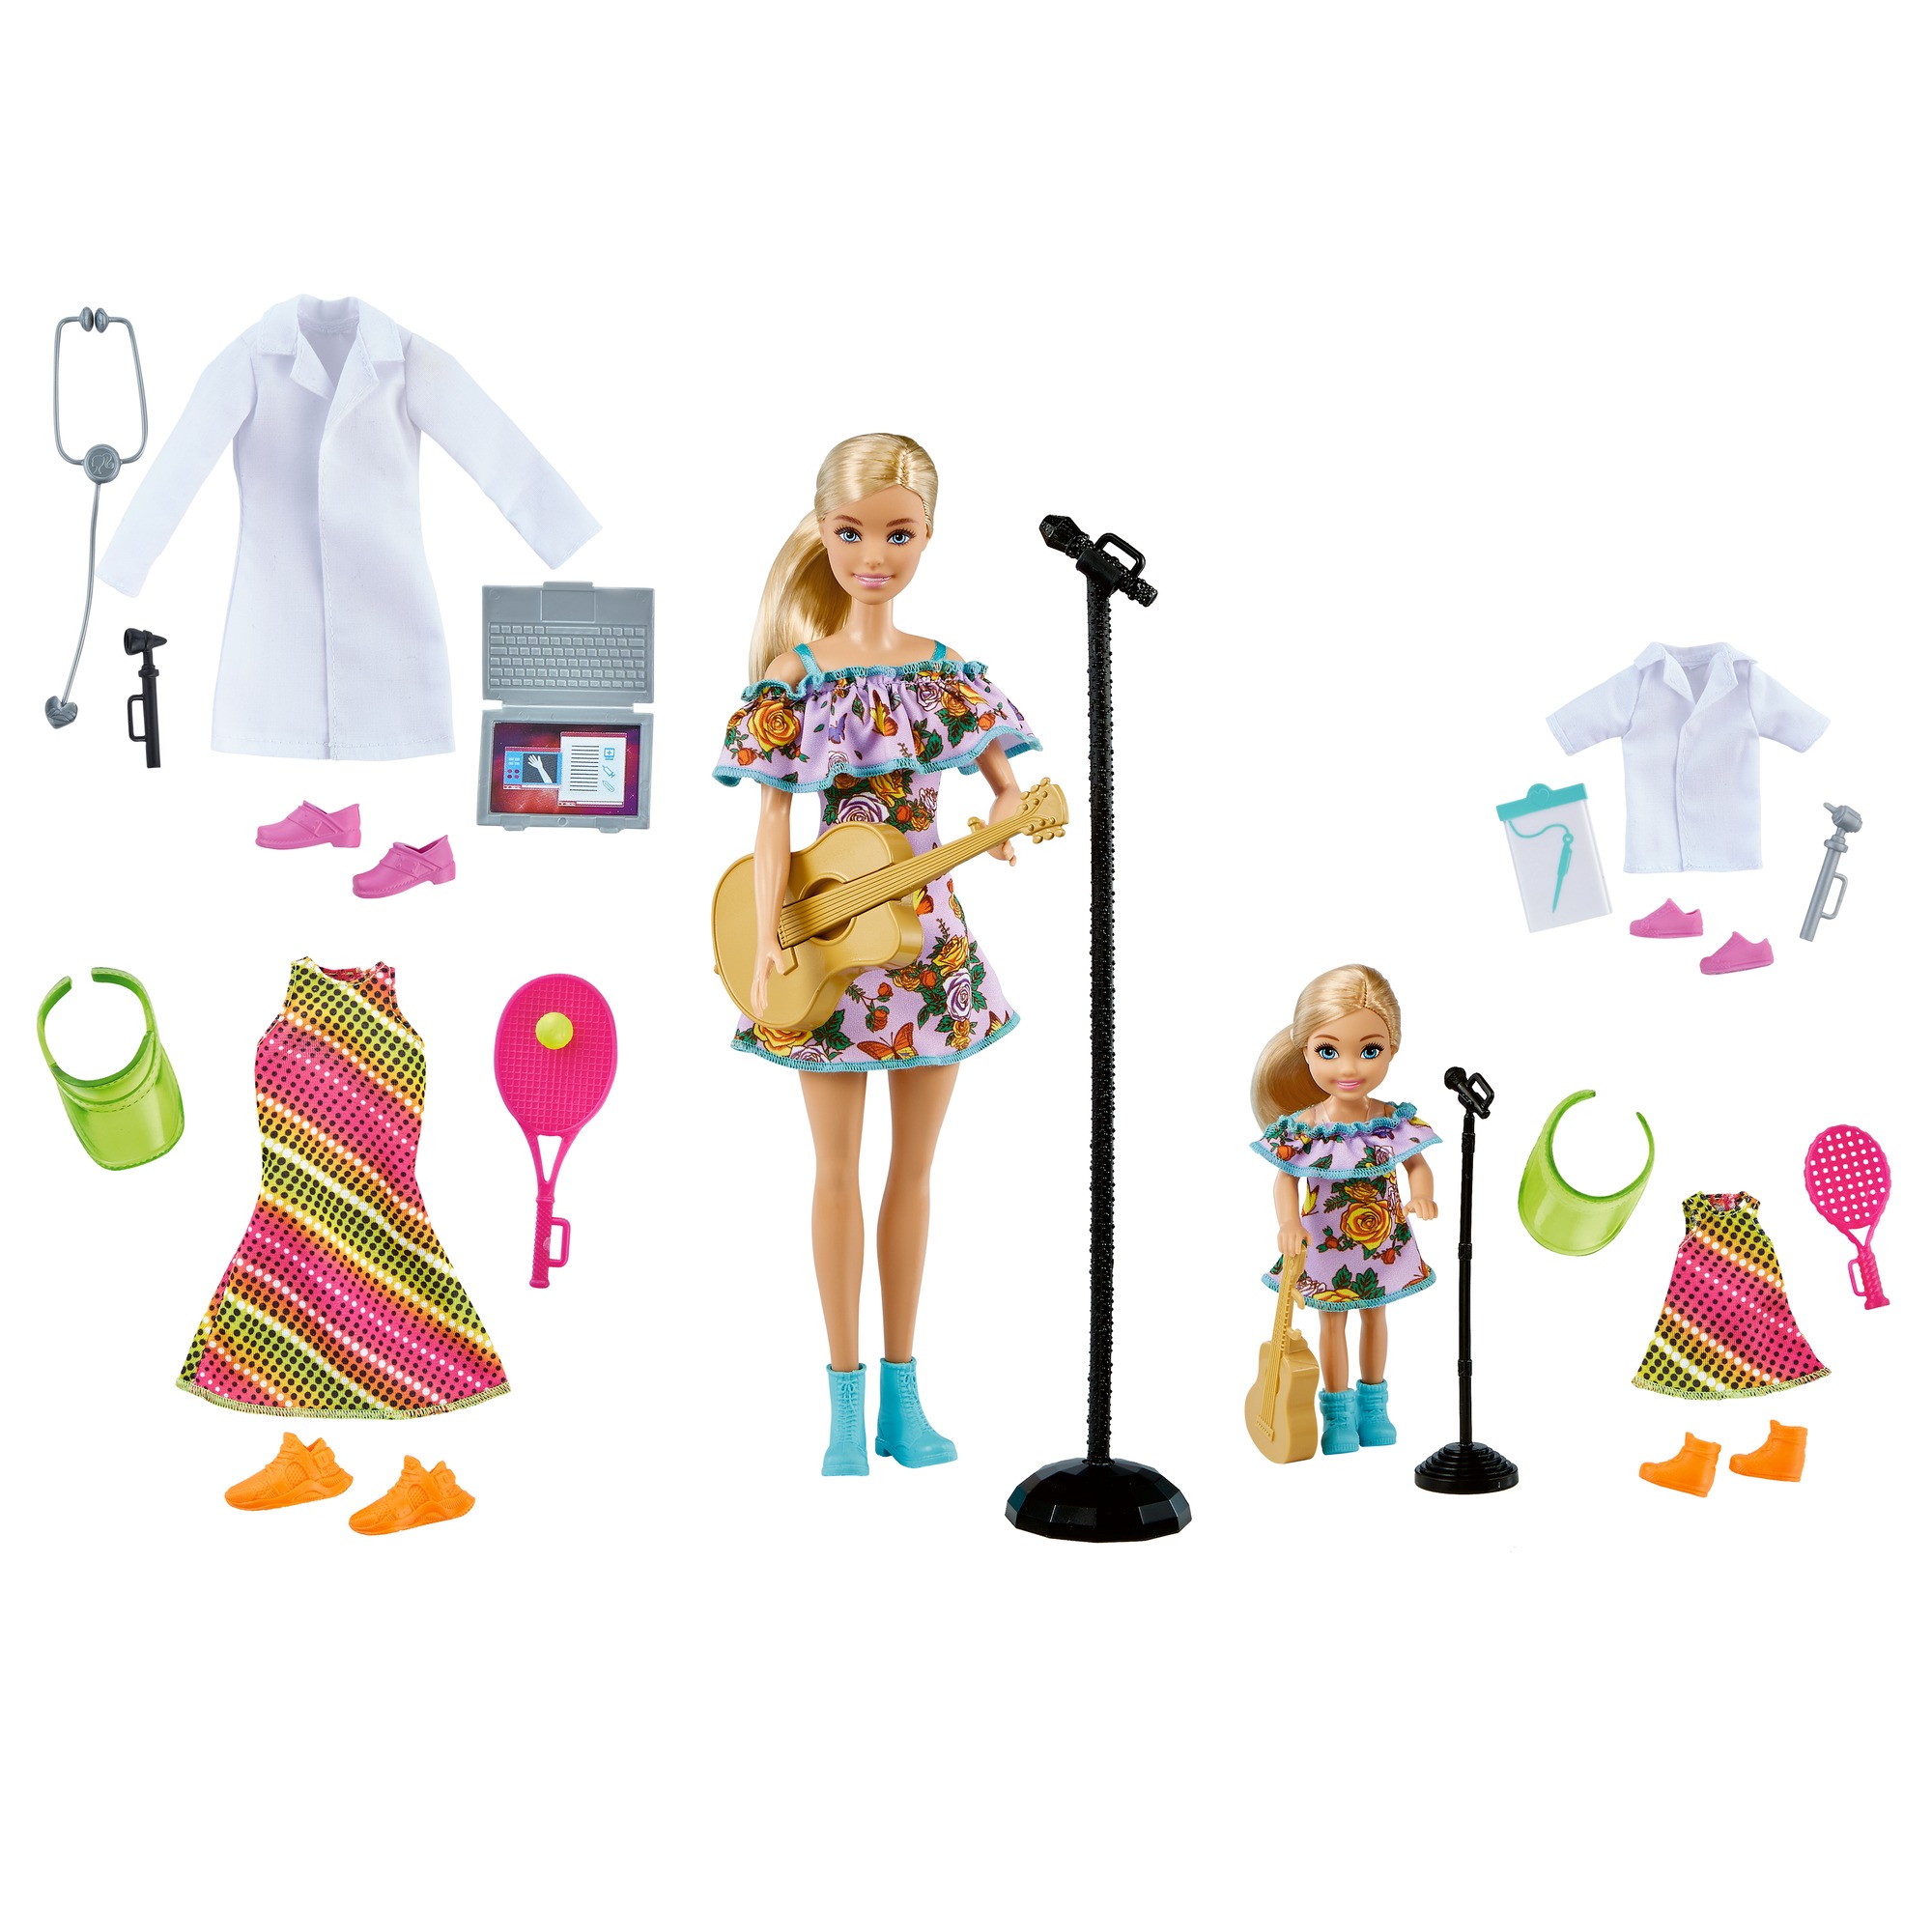 Barbie & Chelsea Careers : 2 Blonde and Doctor, Tennis Star & Musician Pieces Doll Playset $15 Walmart